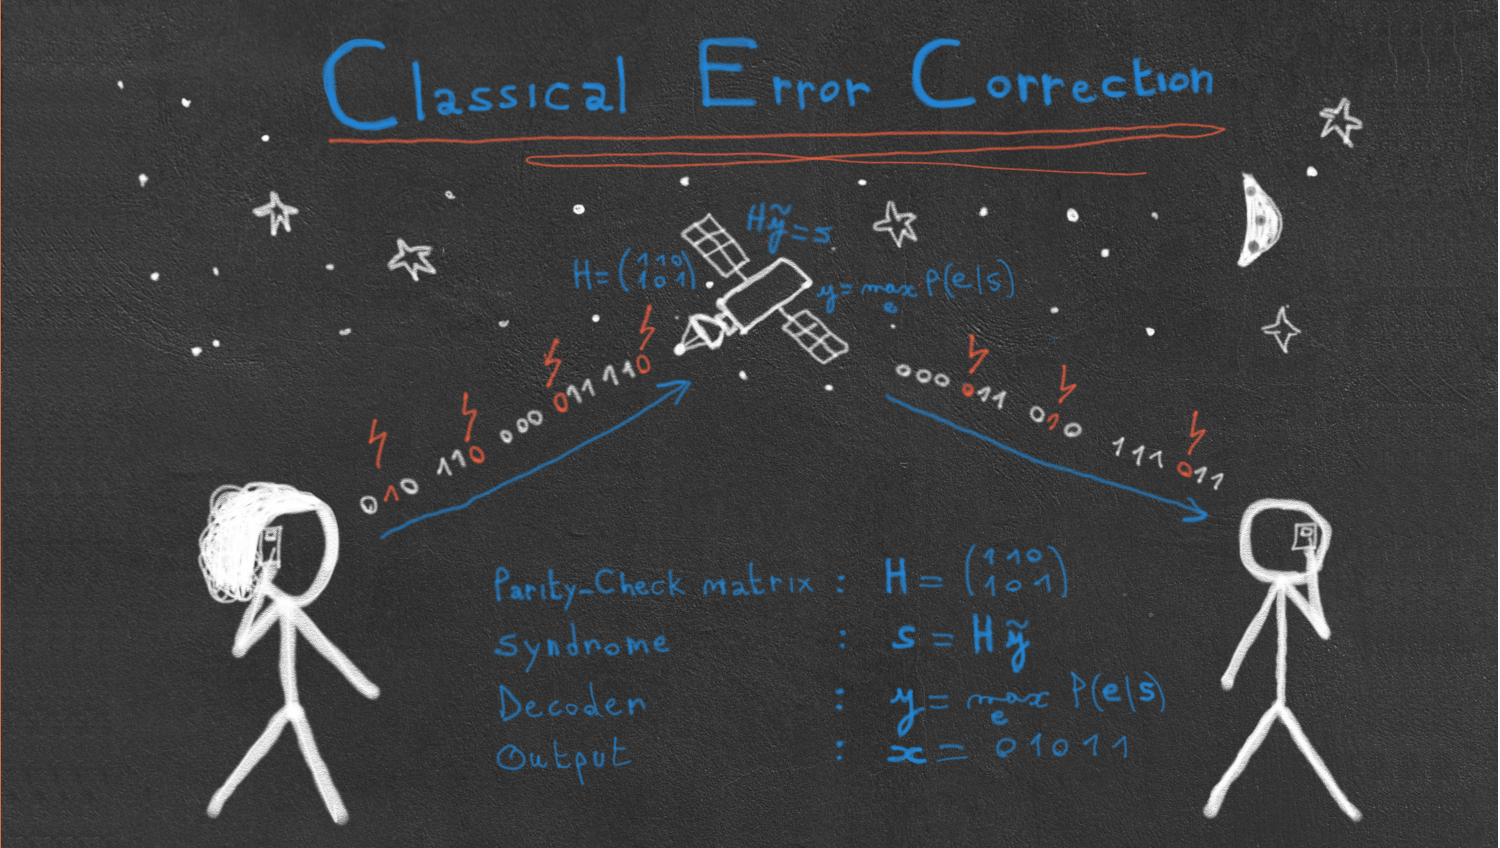 All you need to know about classical error correction